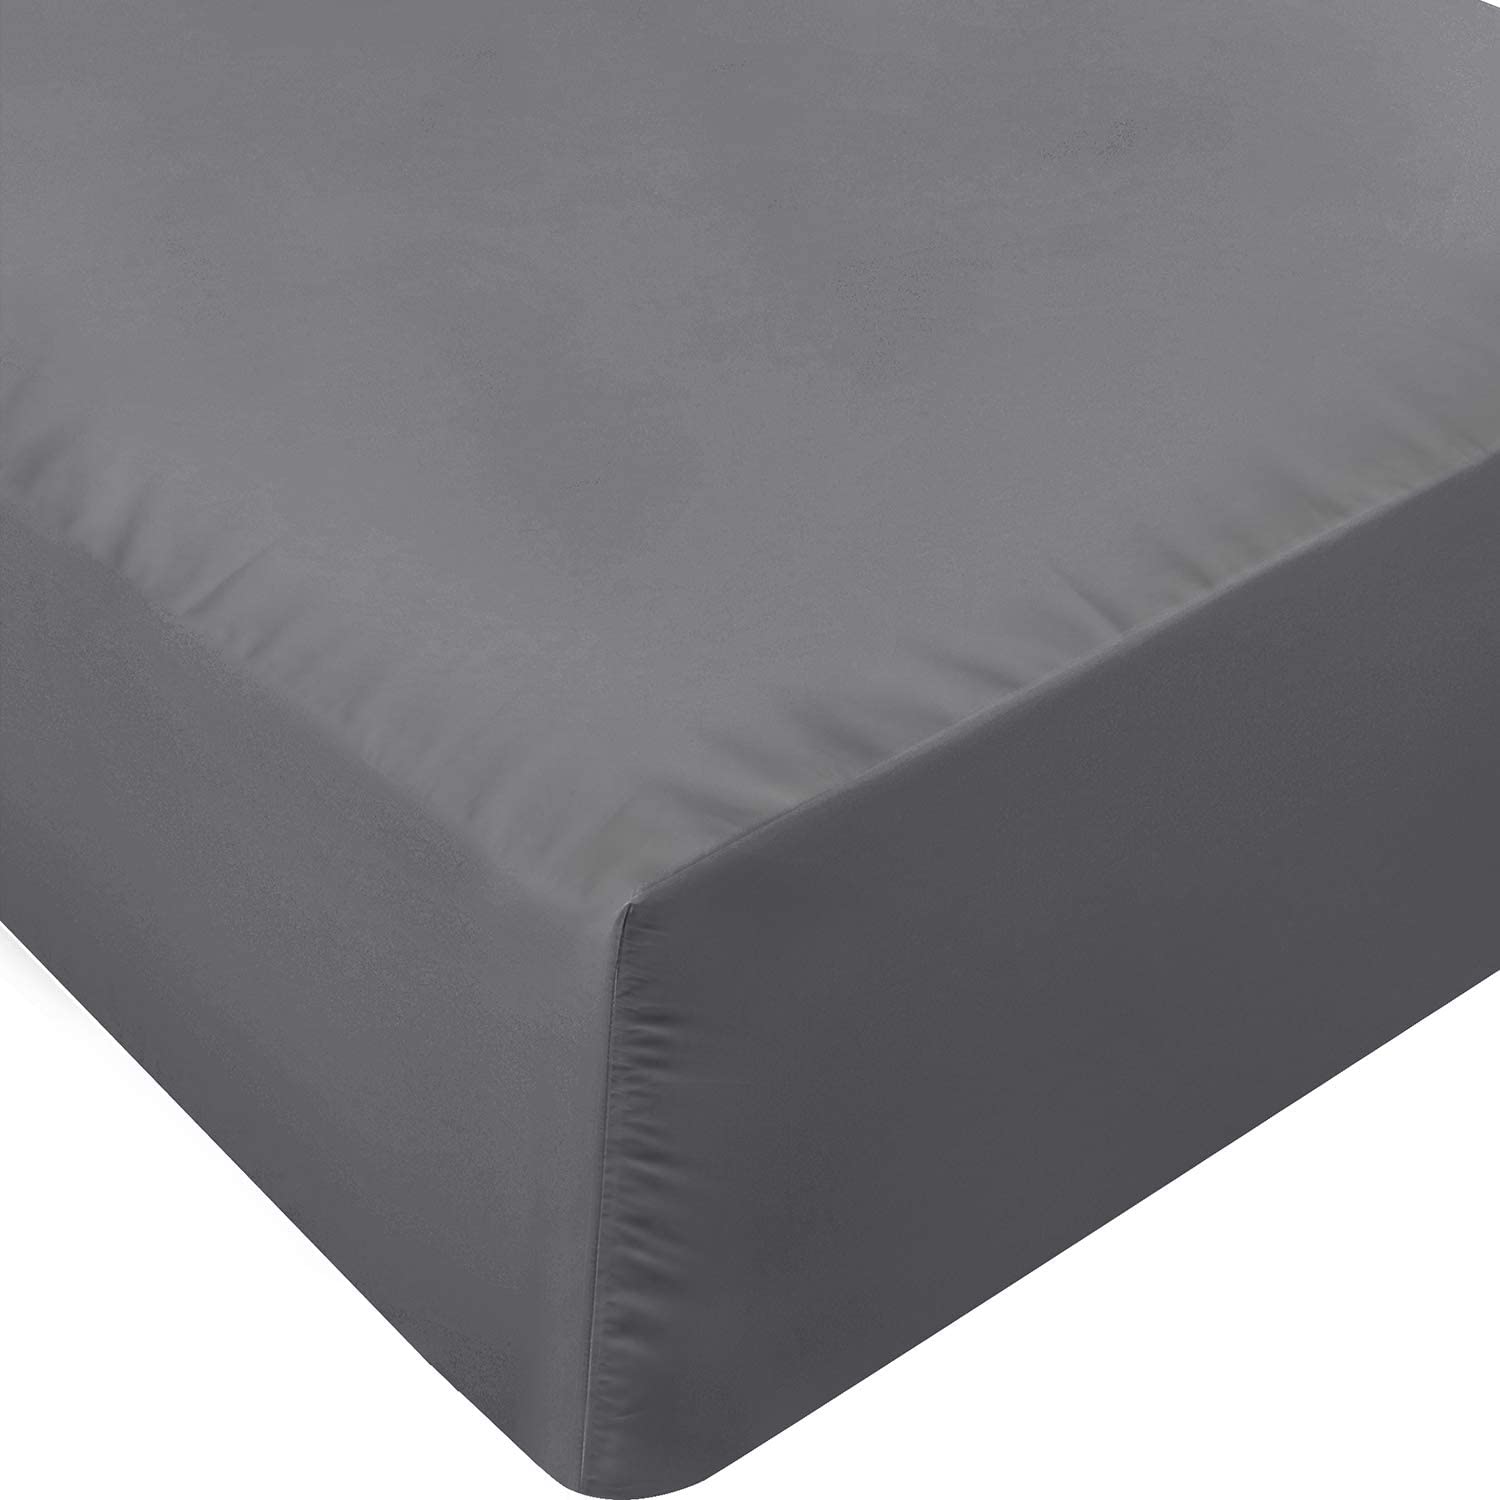 Fitted Bed Sheet - Bottom Sheet - Deep Pocket - Soft Microfiber 1 Fitted Sheet Only Fast Forward